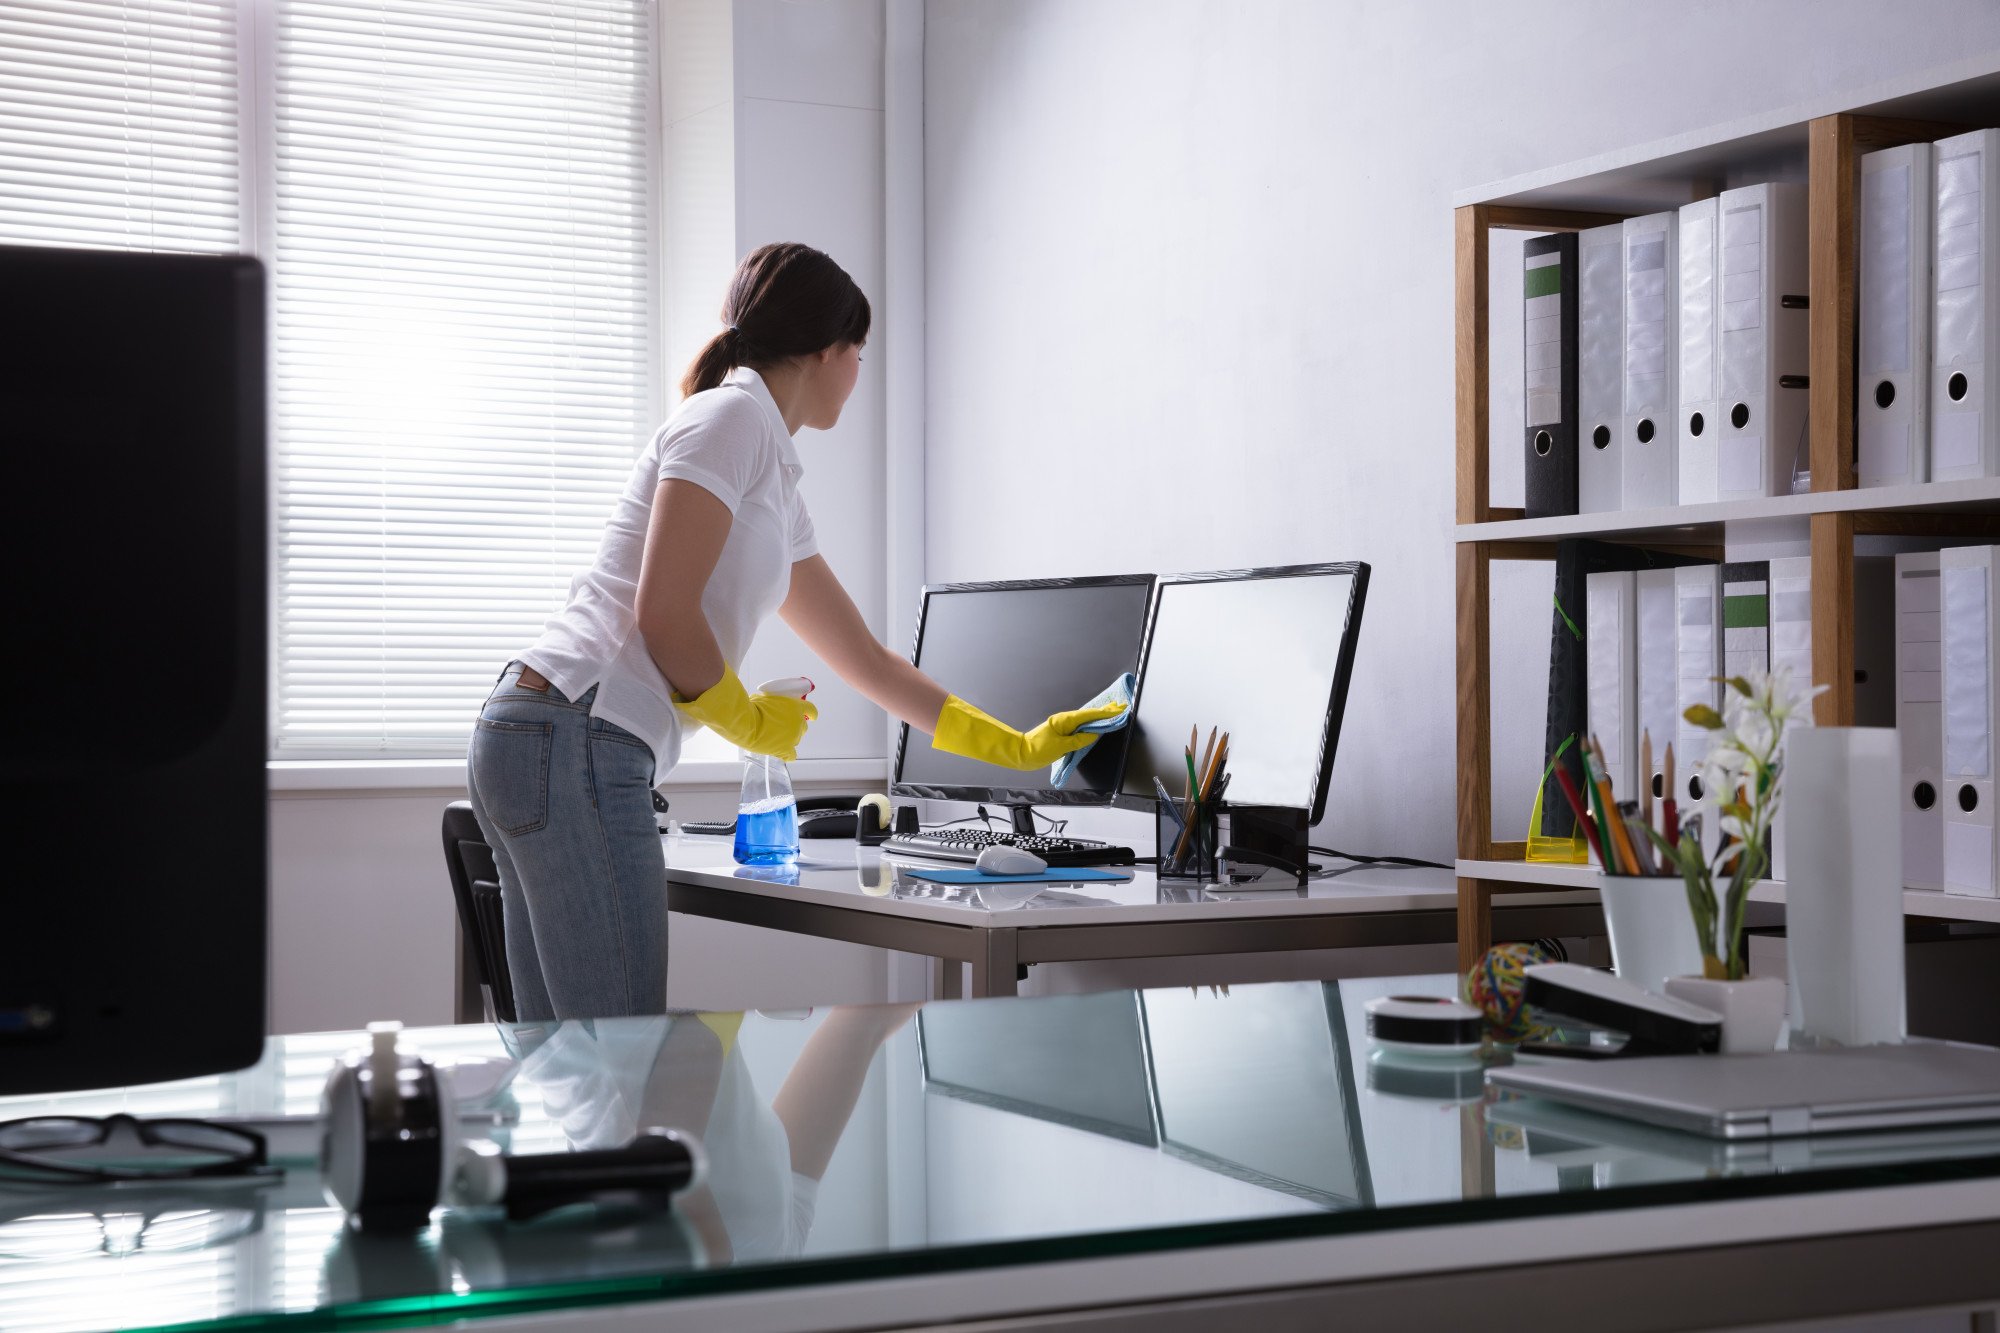 Best Practices for Maintaining a Clean and Productive Office Environment